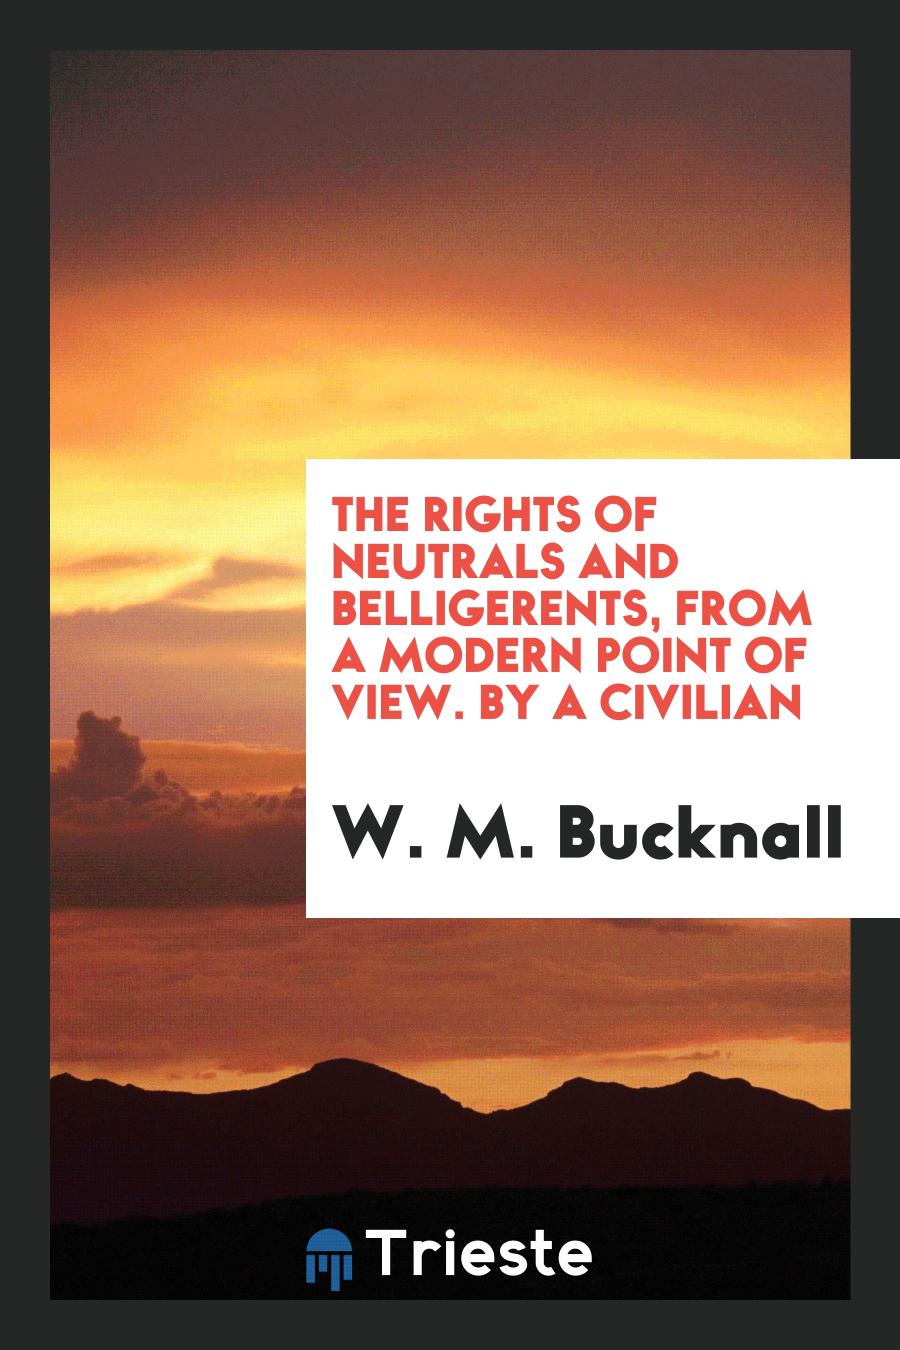 The Rights of Neutrals and Belligerents, From a Modern Point of View. By a Civilian